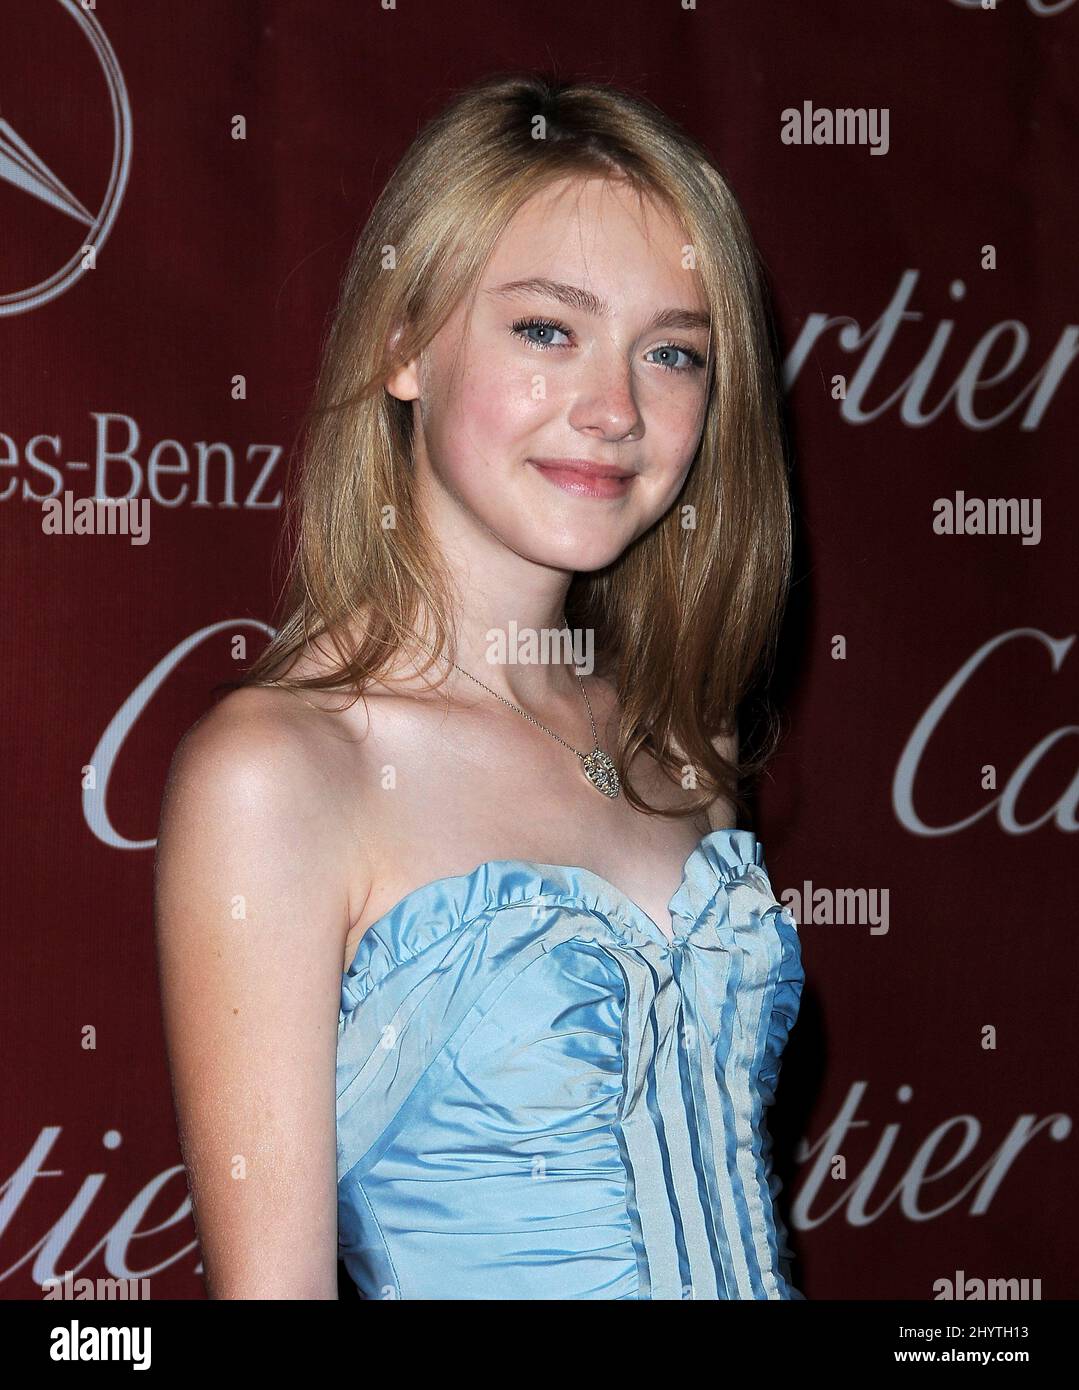 Dakota Fanning attends the 20th Annual Palm Springs International Film Festival Awards Gala at the Palm Springs Convention Center Stock Photo